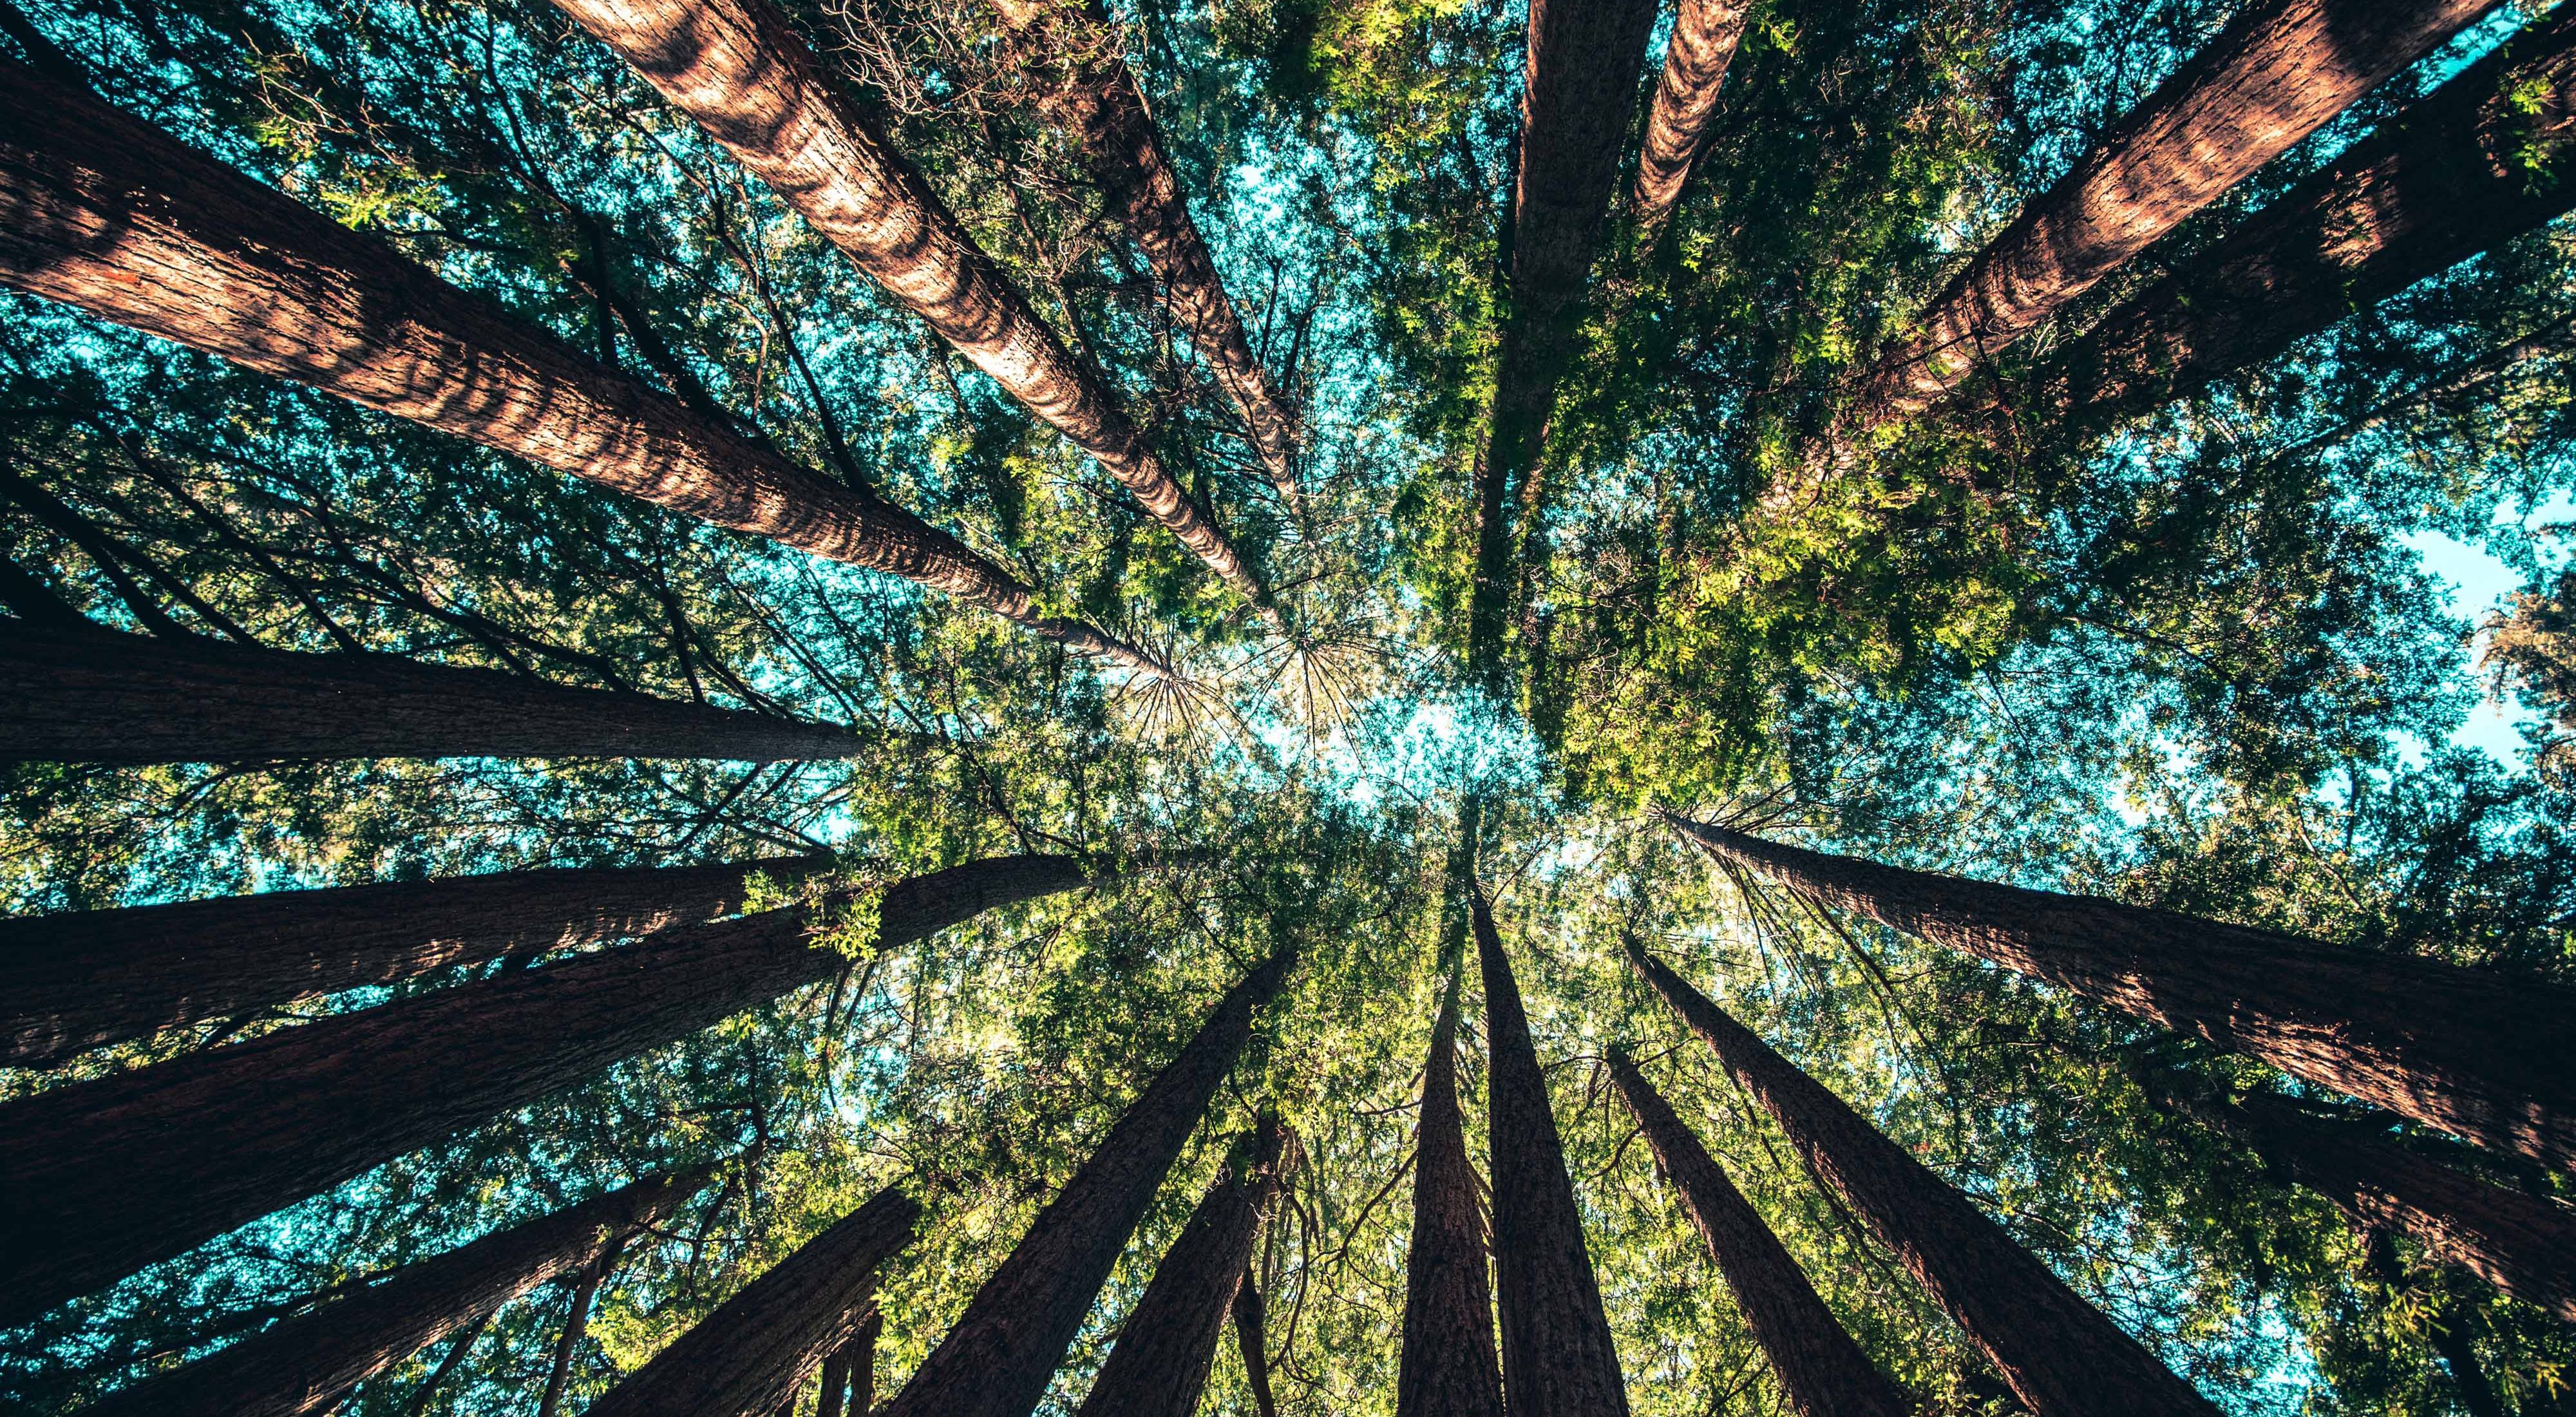 Looking up at evergreen trees in California